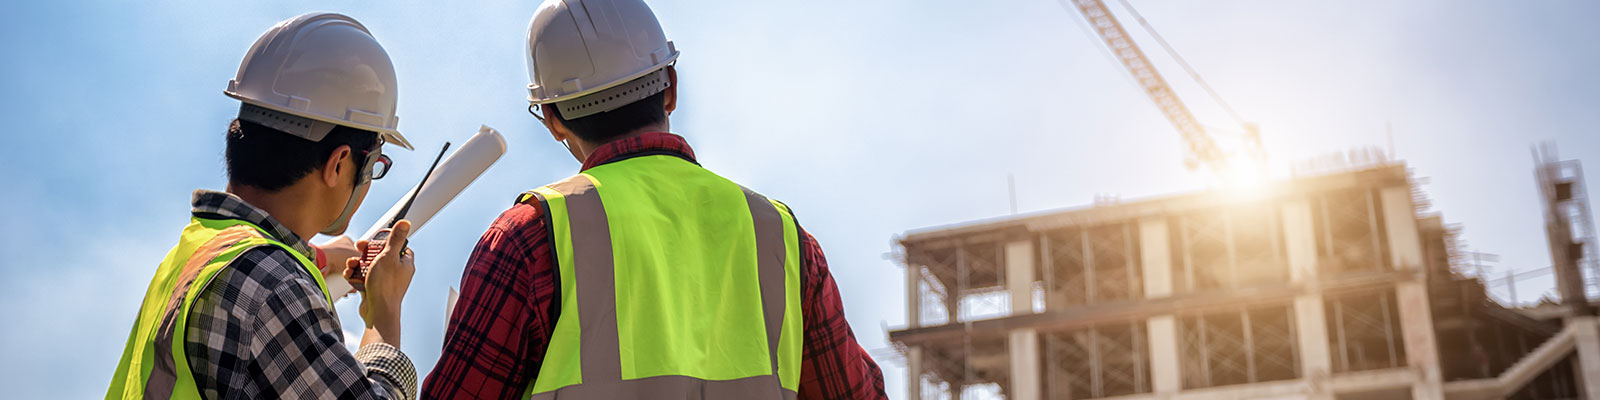 Commercial construction image showing two men in hard hats looking at a construction site